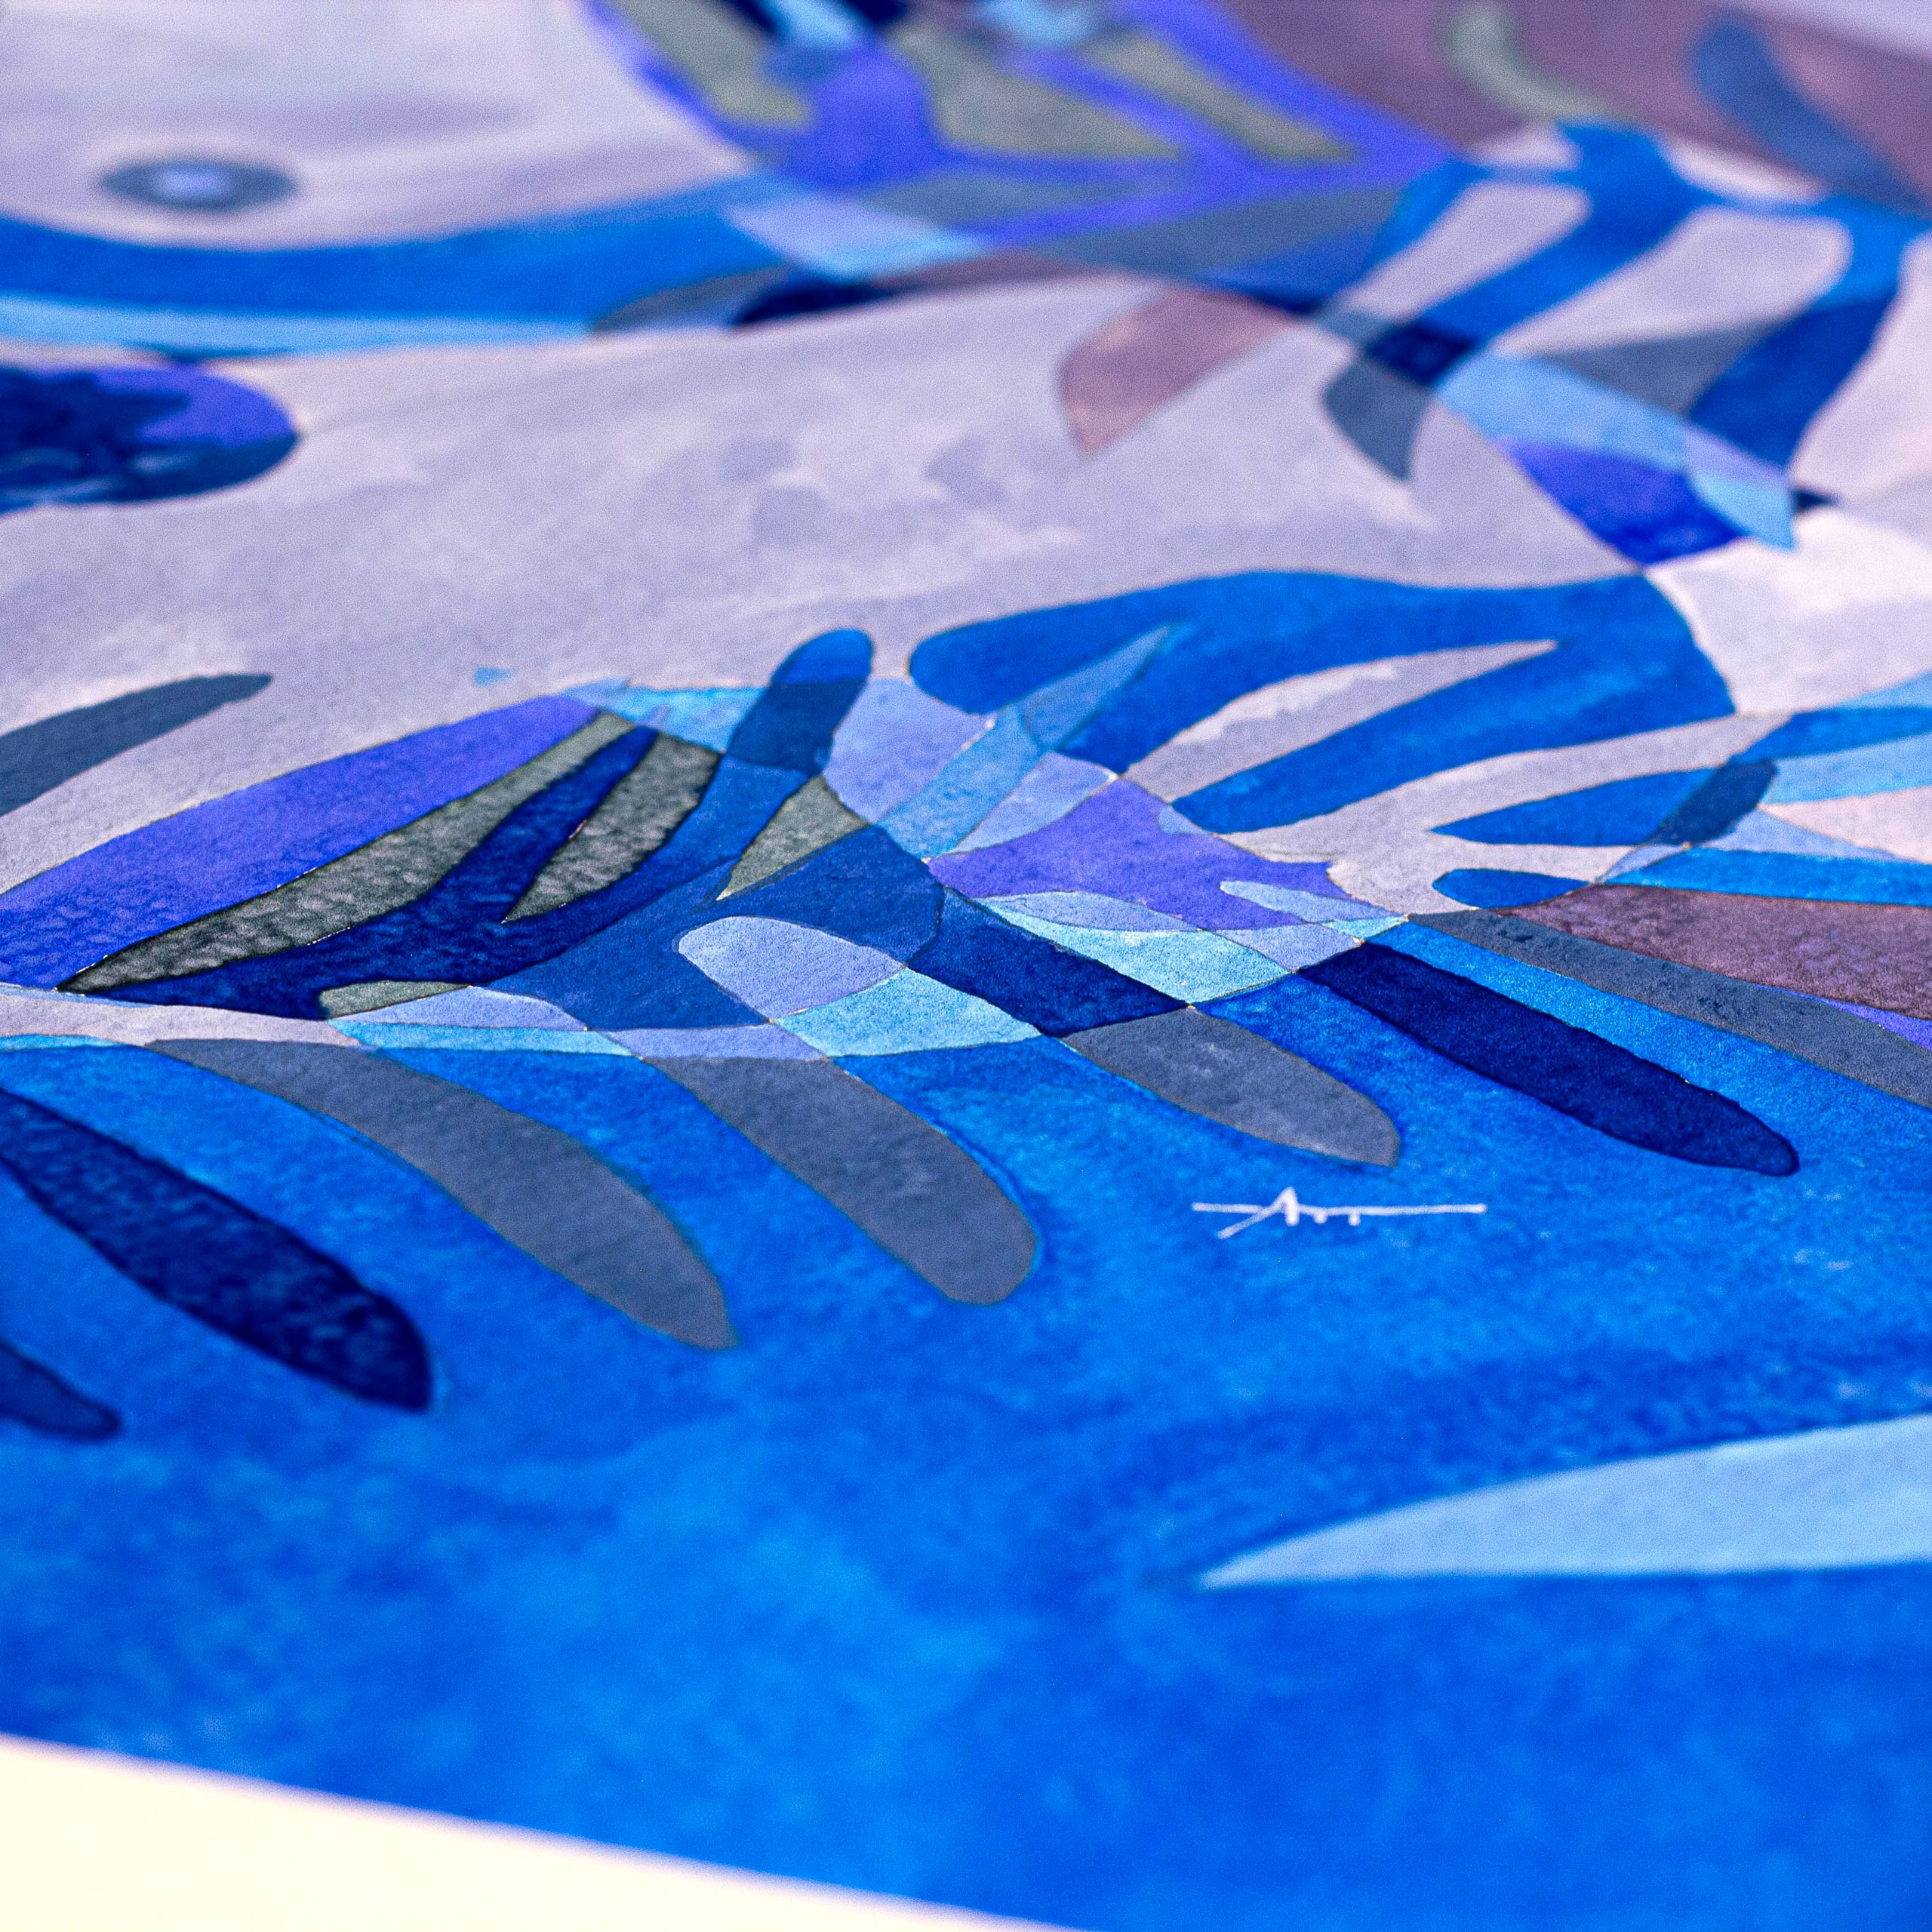 Abstract nude N°10-blue : Fern Leaves